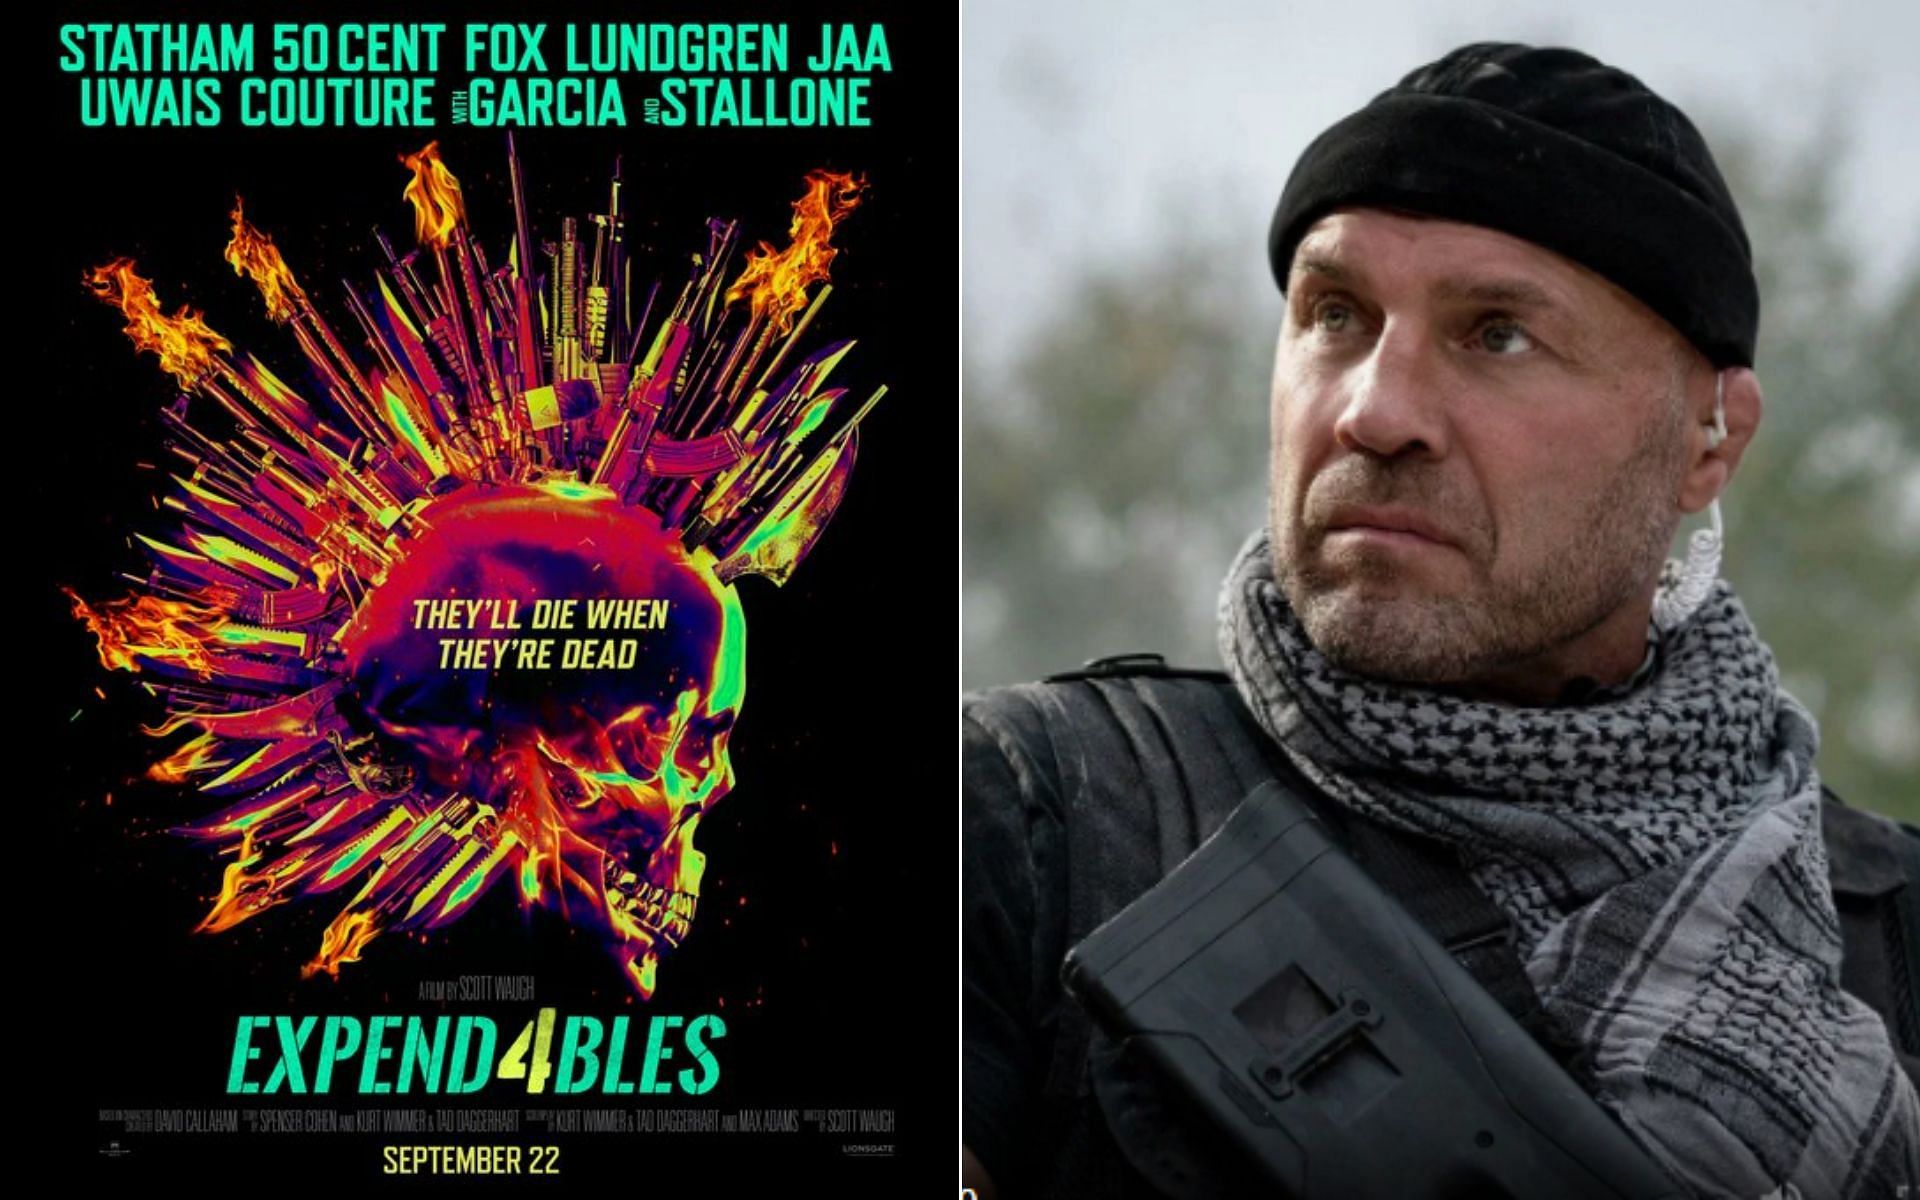 Expend4bles official poster [Left], and Randy Couture [Right] [Photo credit: @expendables and @Randy_Couture - Twitter]